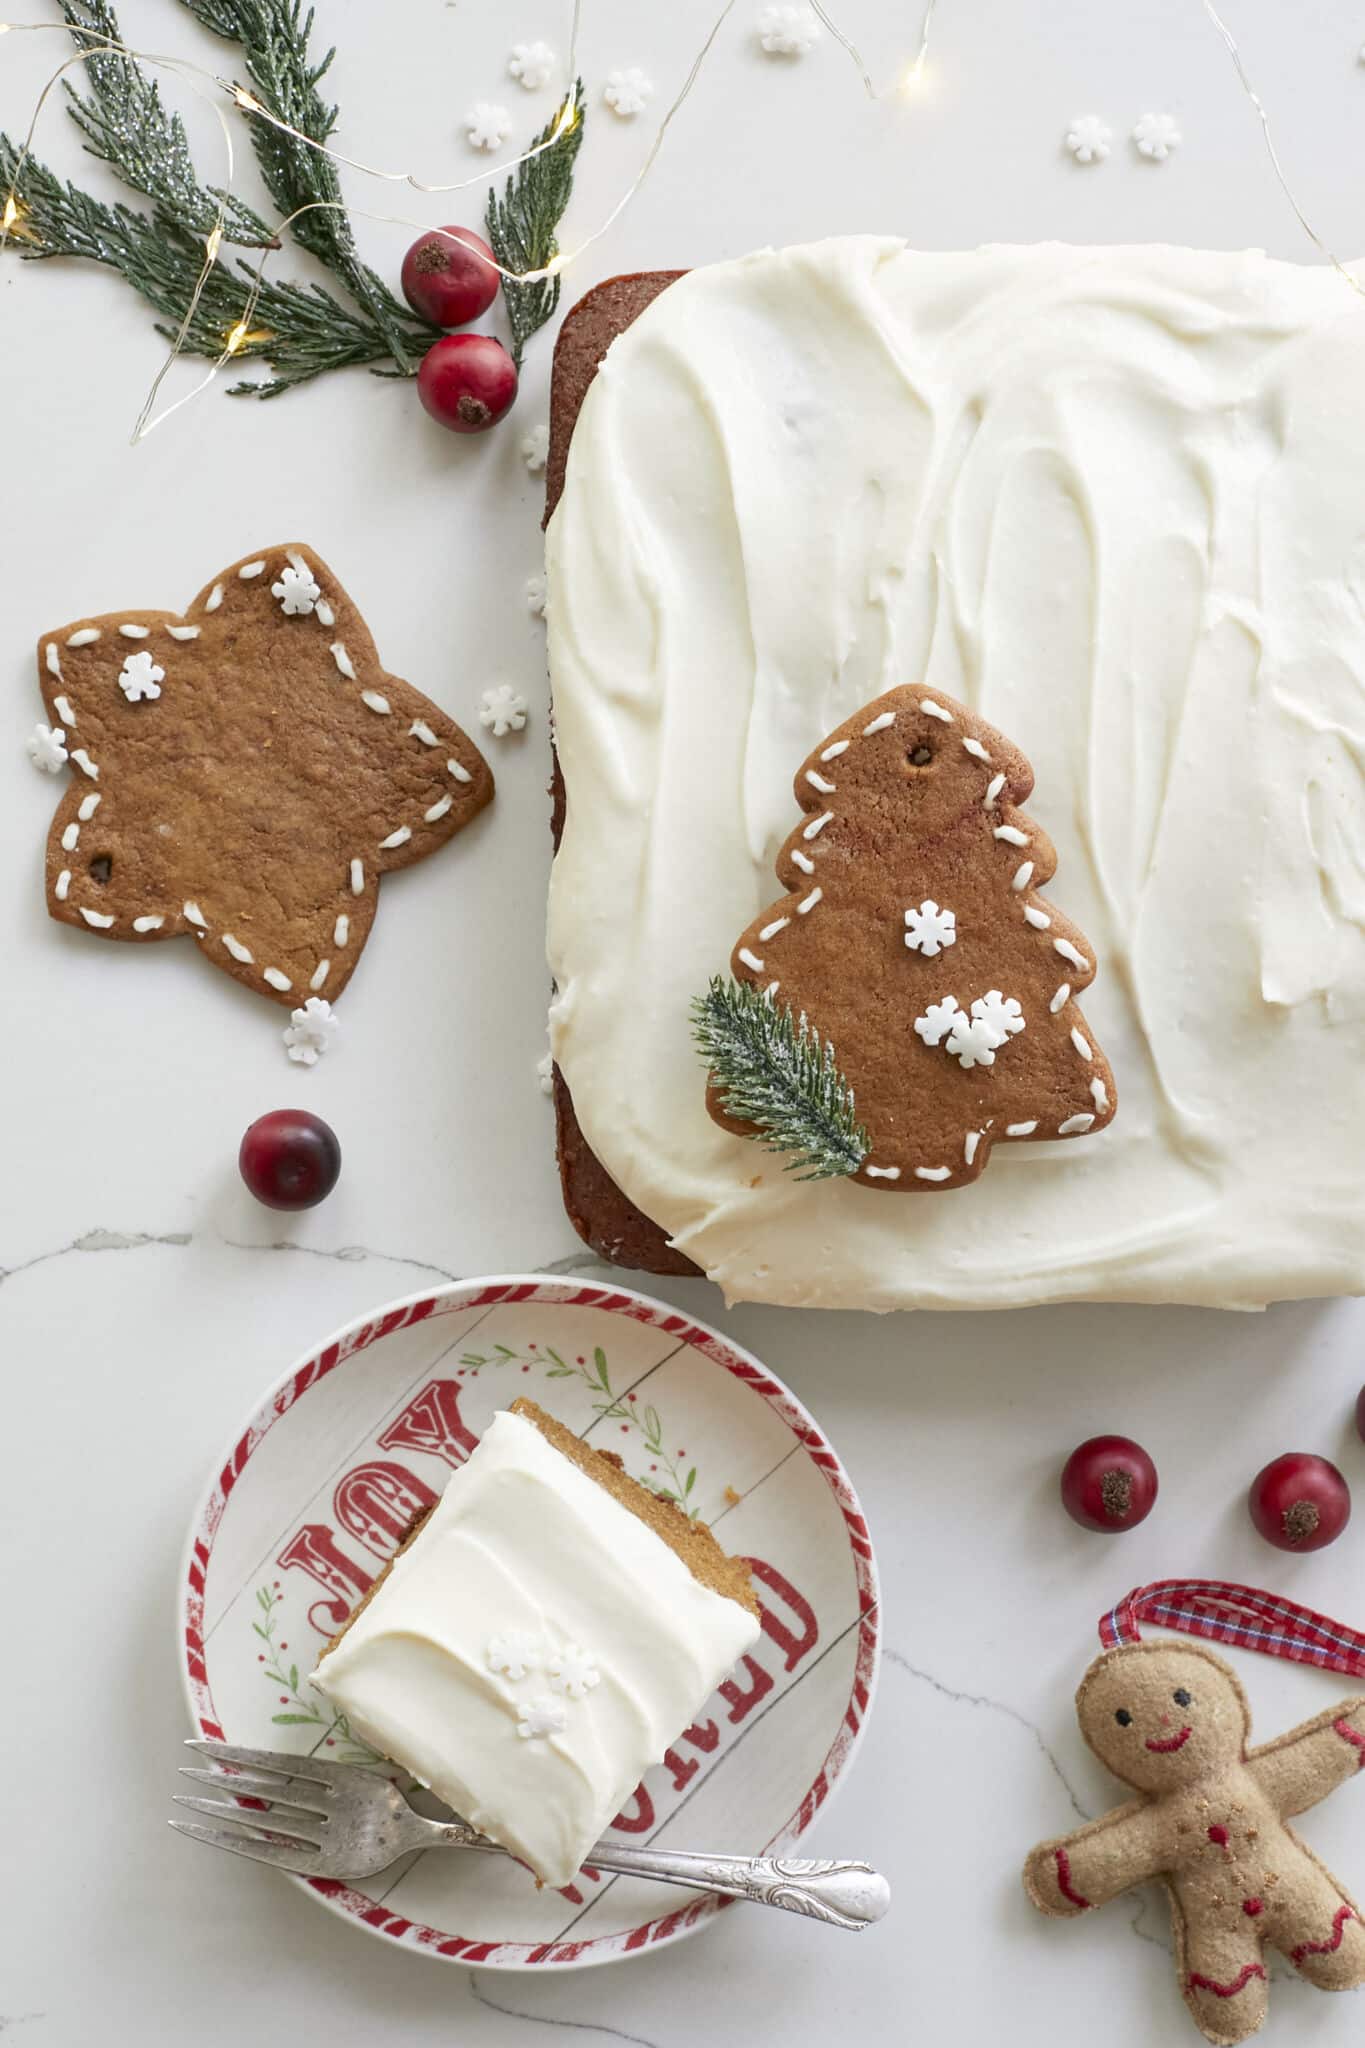 A Perfectly-Spiced Gingerbread Sheet Cake looks moist and soft, topped with velvety cream cheese frosting. A star-shape gingerbread cookie is next to the cake and a Christmas tree shape gingerbread cookie is on the cake for decoration. A generous square of it is served on a Christmas-themed dessert plate. 